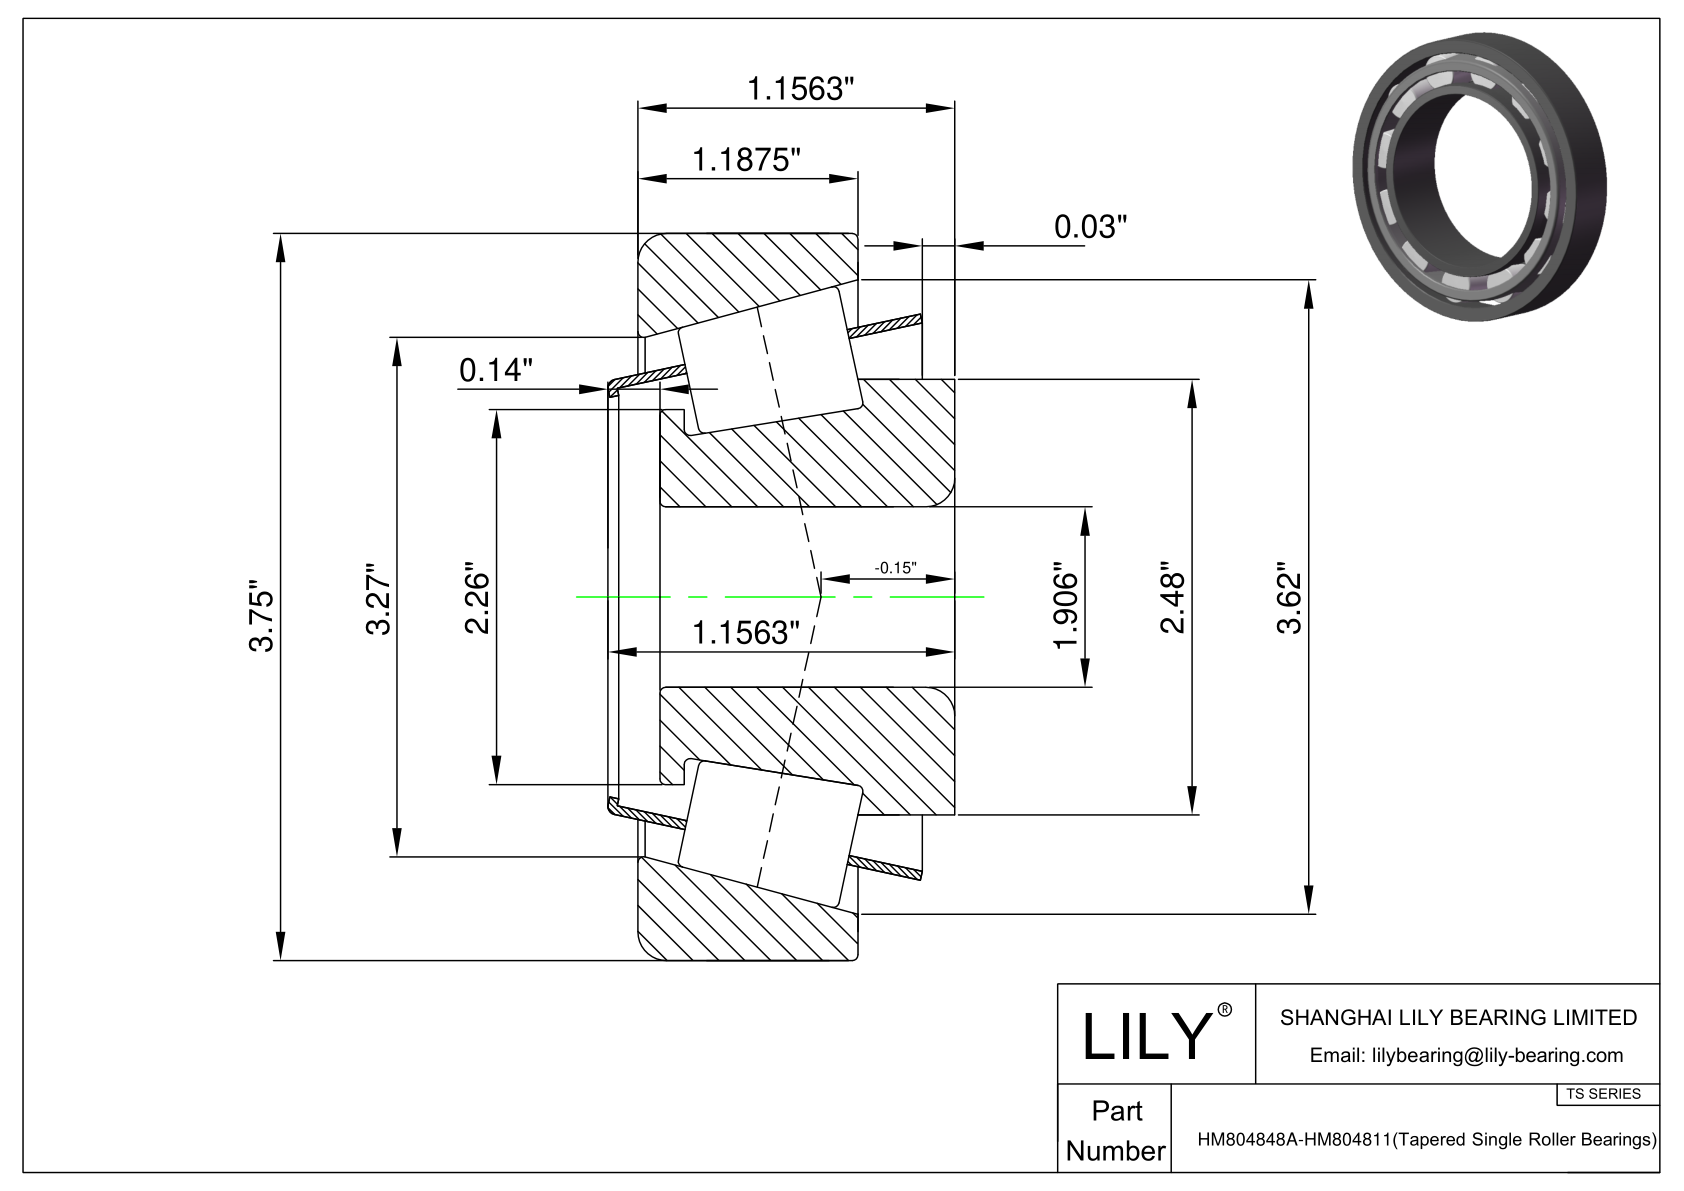 HM804848A-HM804811 TS (Tapered Single Roller Bearings) (Imperial) cad drawing